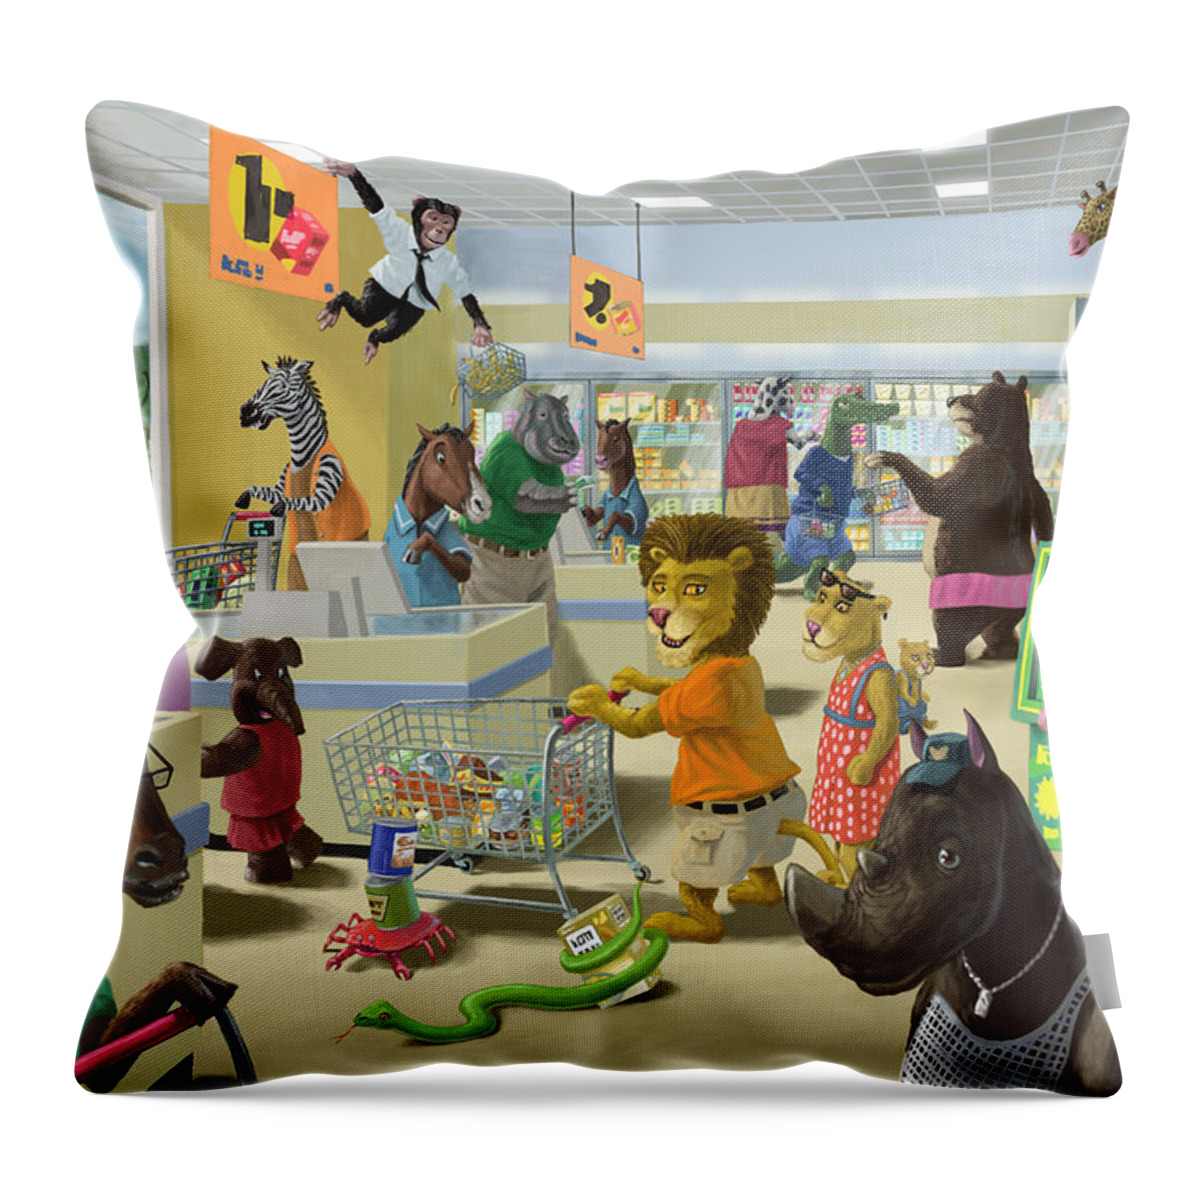 Supermarket Throw Pillow featuring the painting Animal Supermarket by Martin Davey